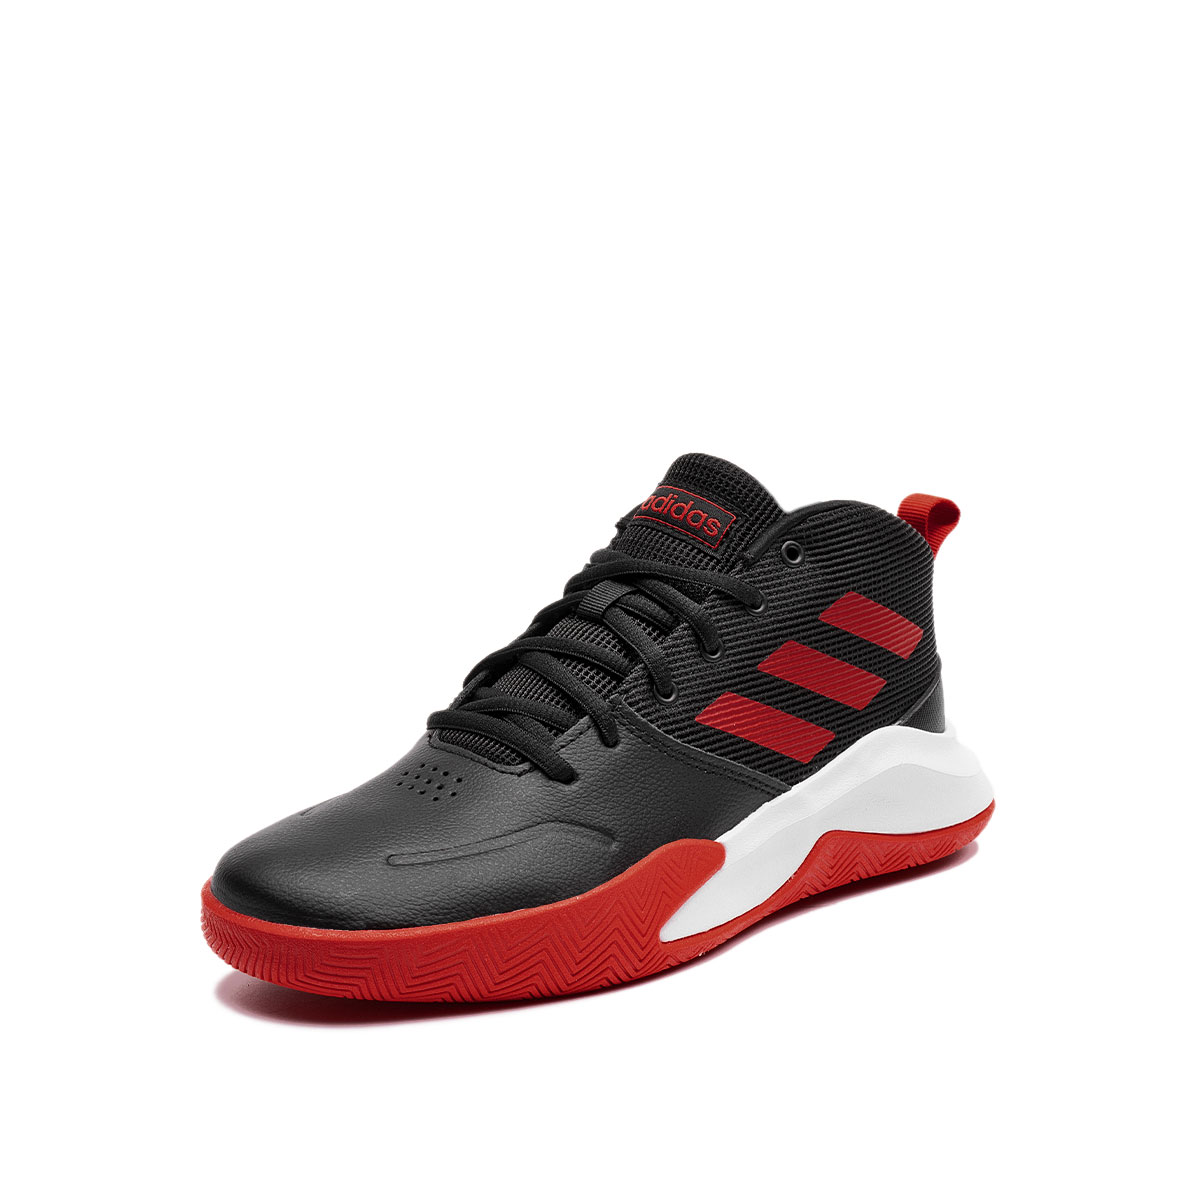 adidas Ownthegame Wide  EF0309